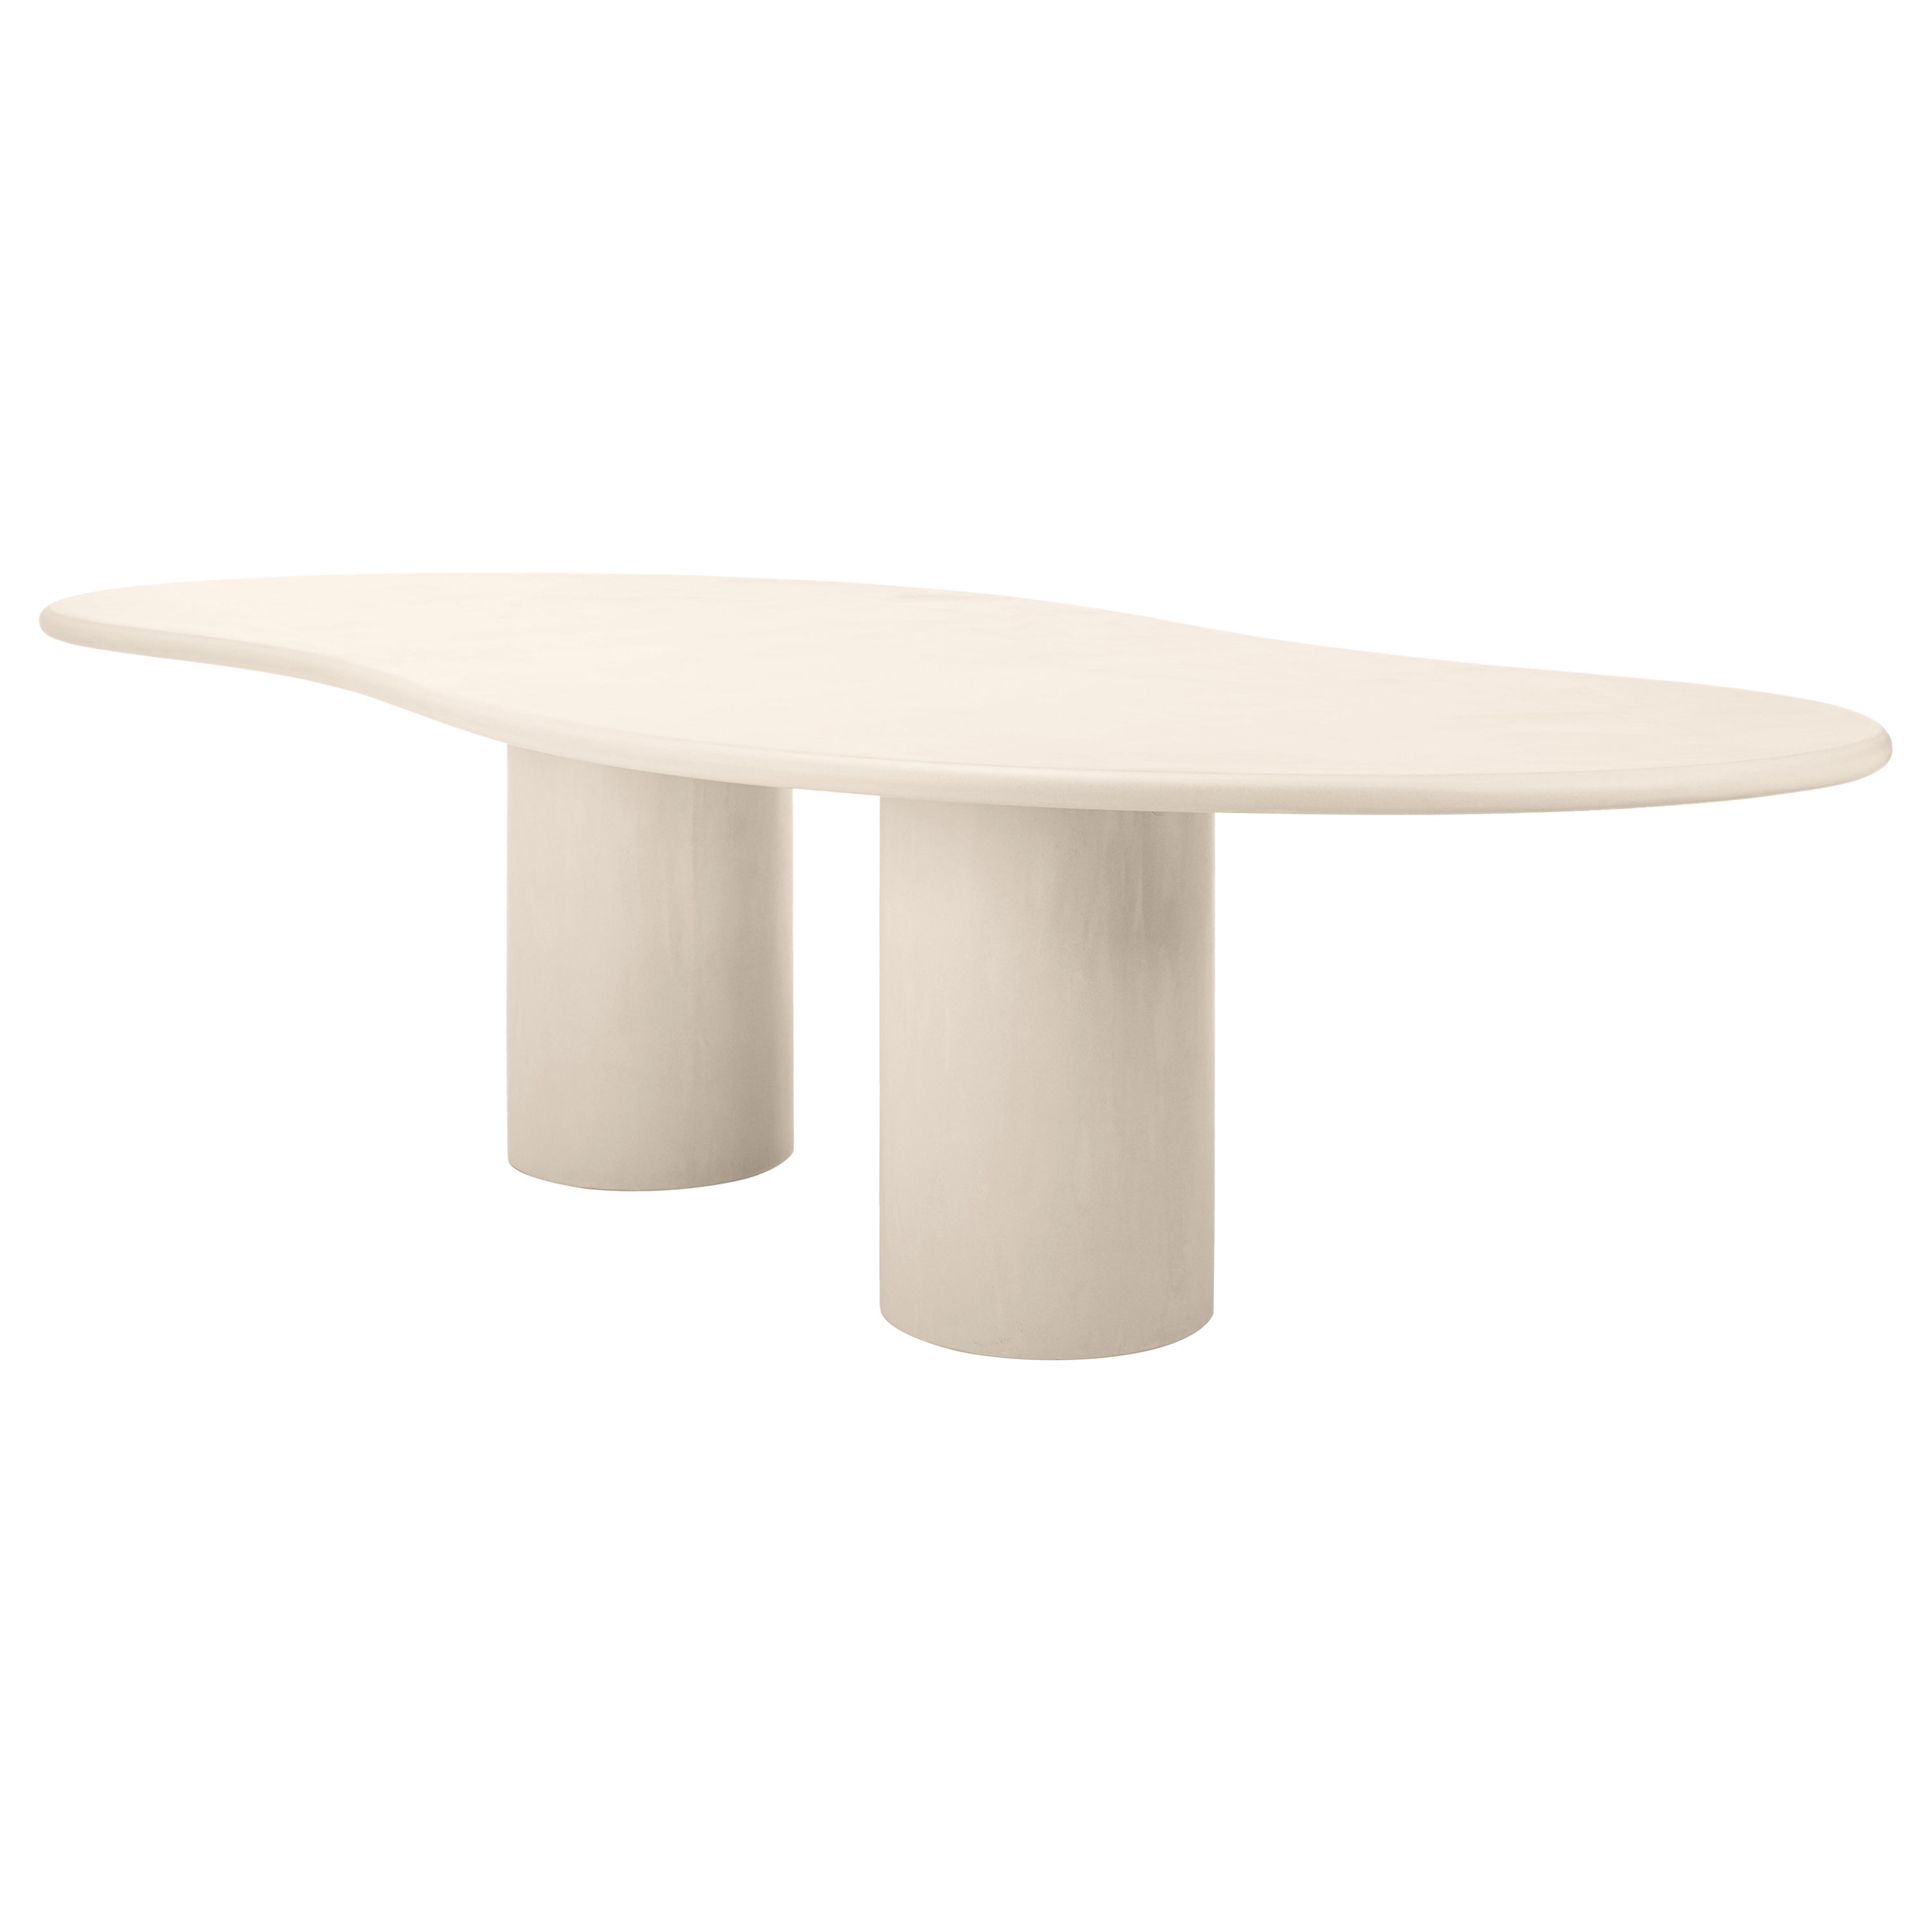 Natural Plaster Dining Table "Latus" 300 by Isabelle Beaumont For Sale